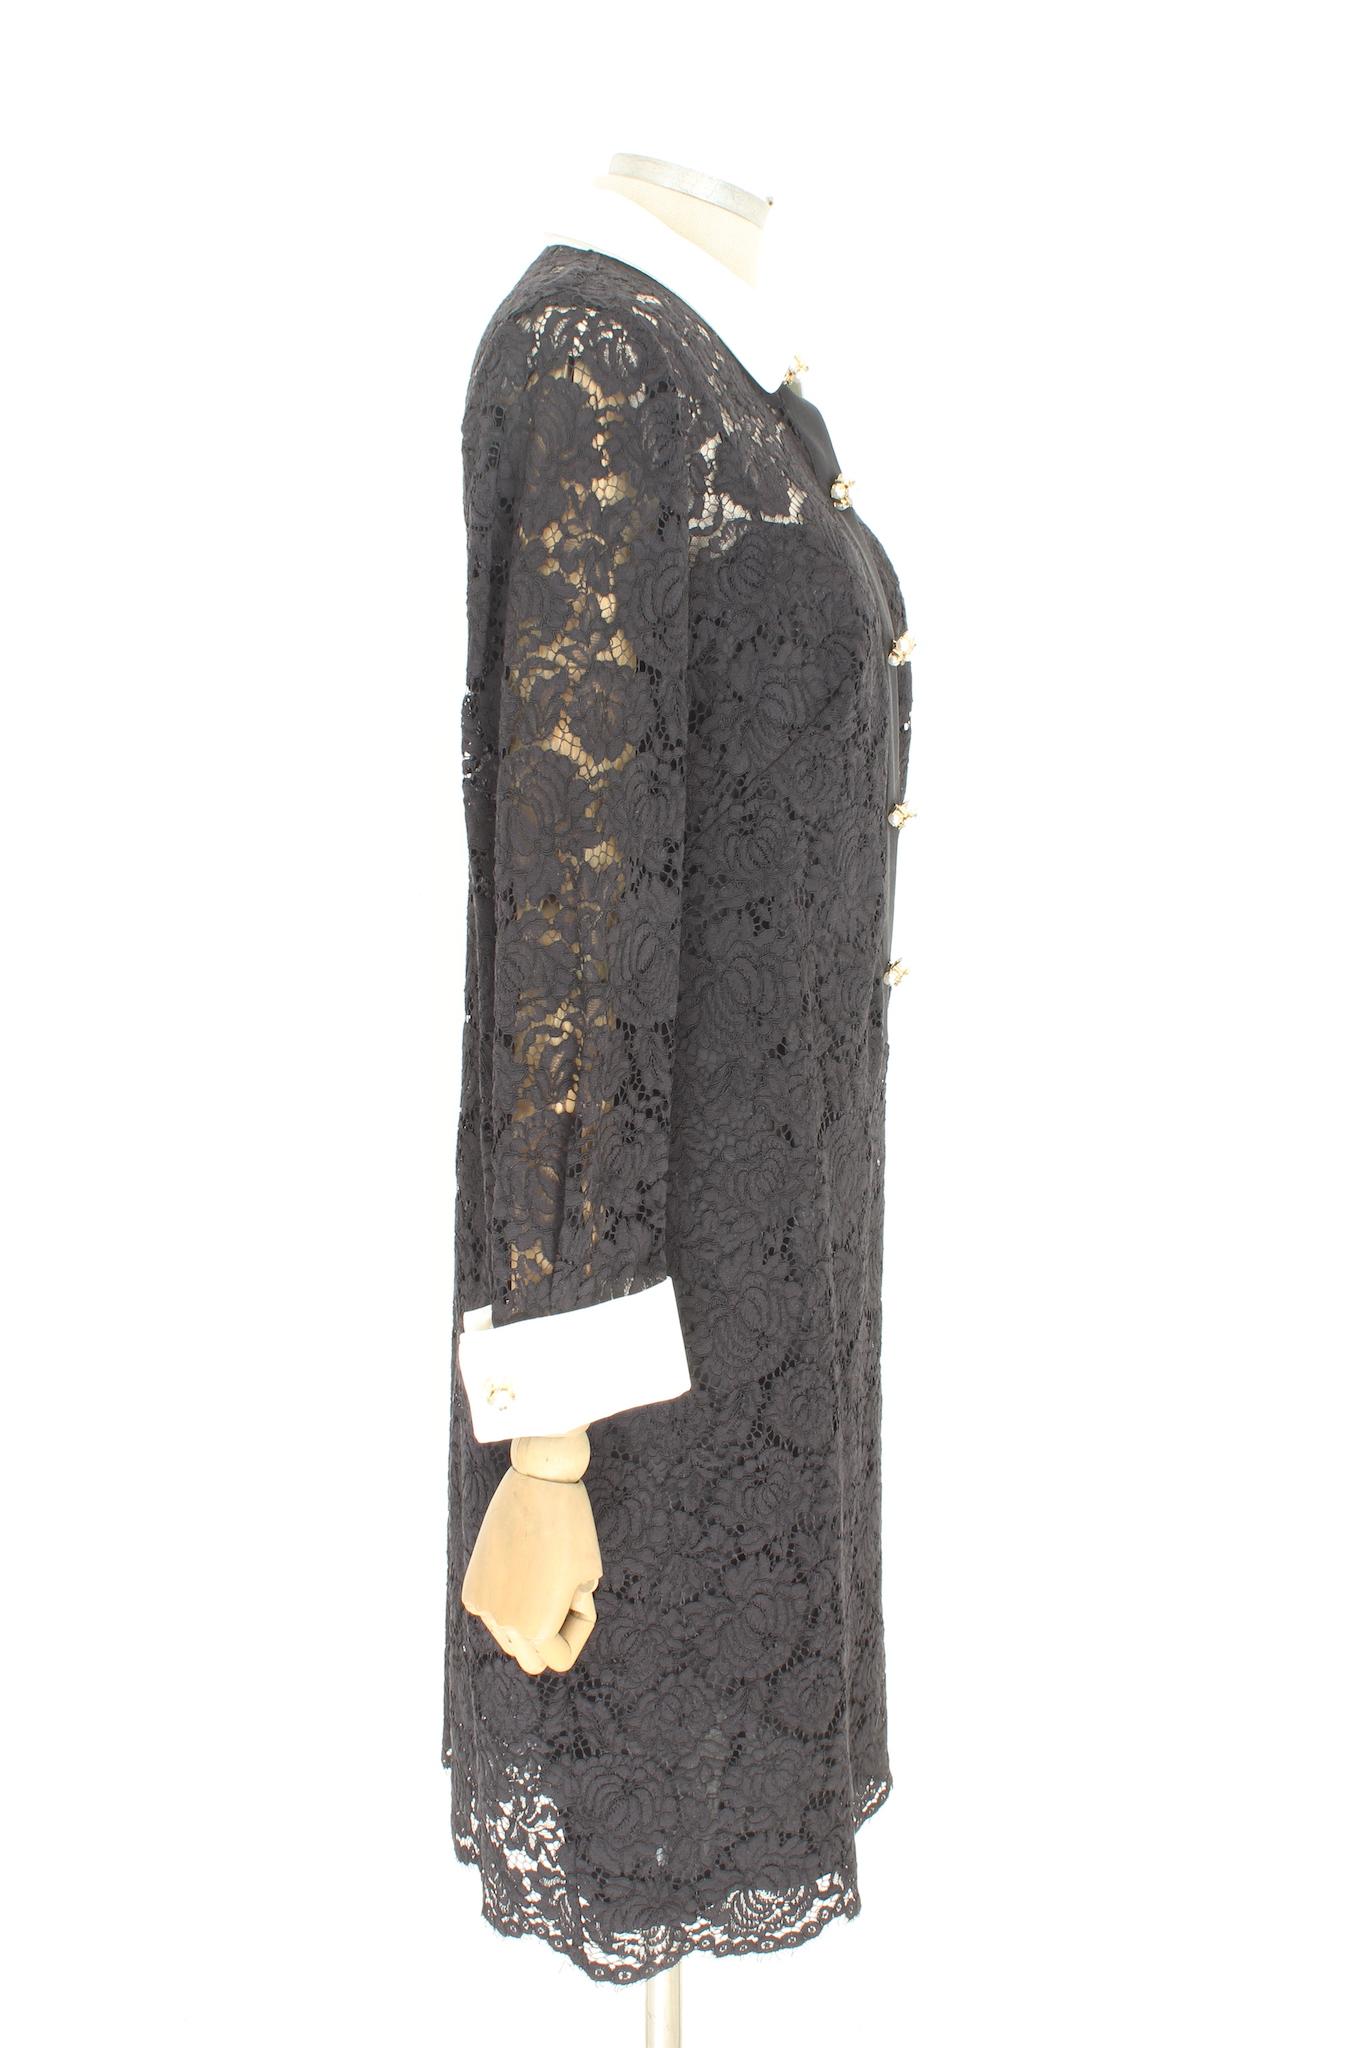 Luisa Spagnoli Black Lace Evening Floral Dress 2000s In Good Condition For Sale In Brindisi, Bt